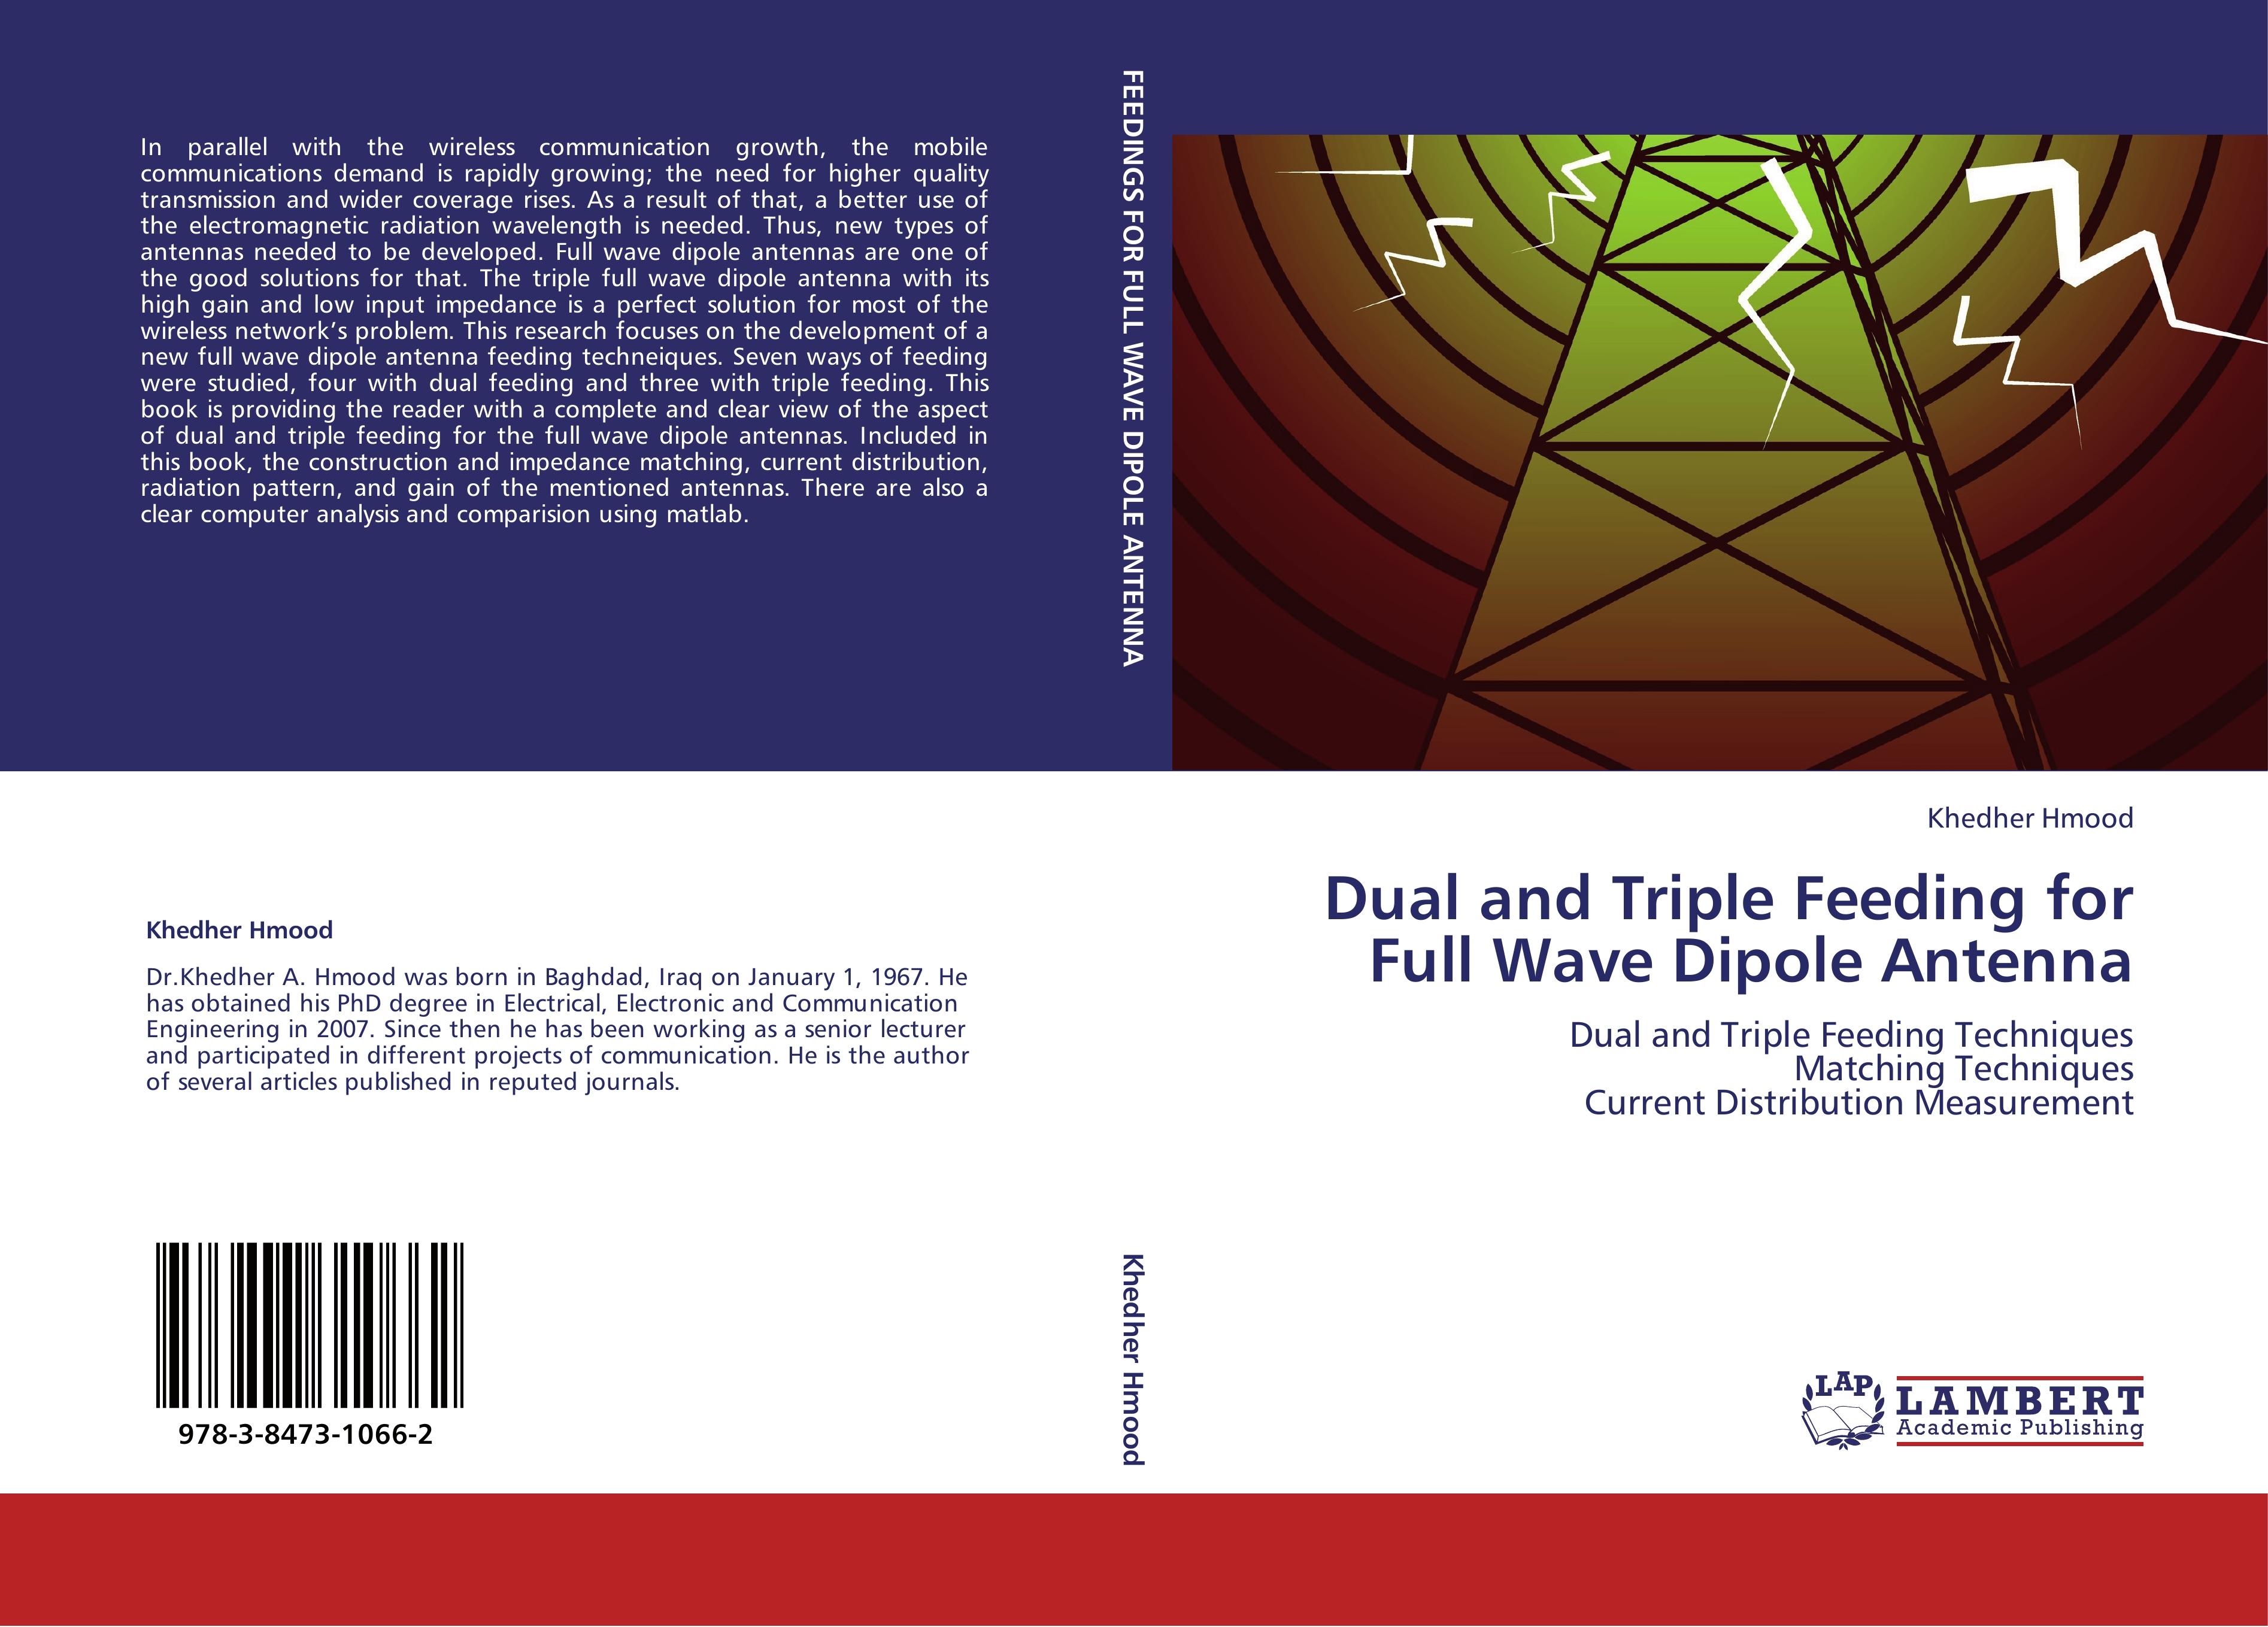 Dual and Triple Feeding for Full Wave Dipole Antenna - Khedher Hmood